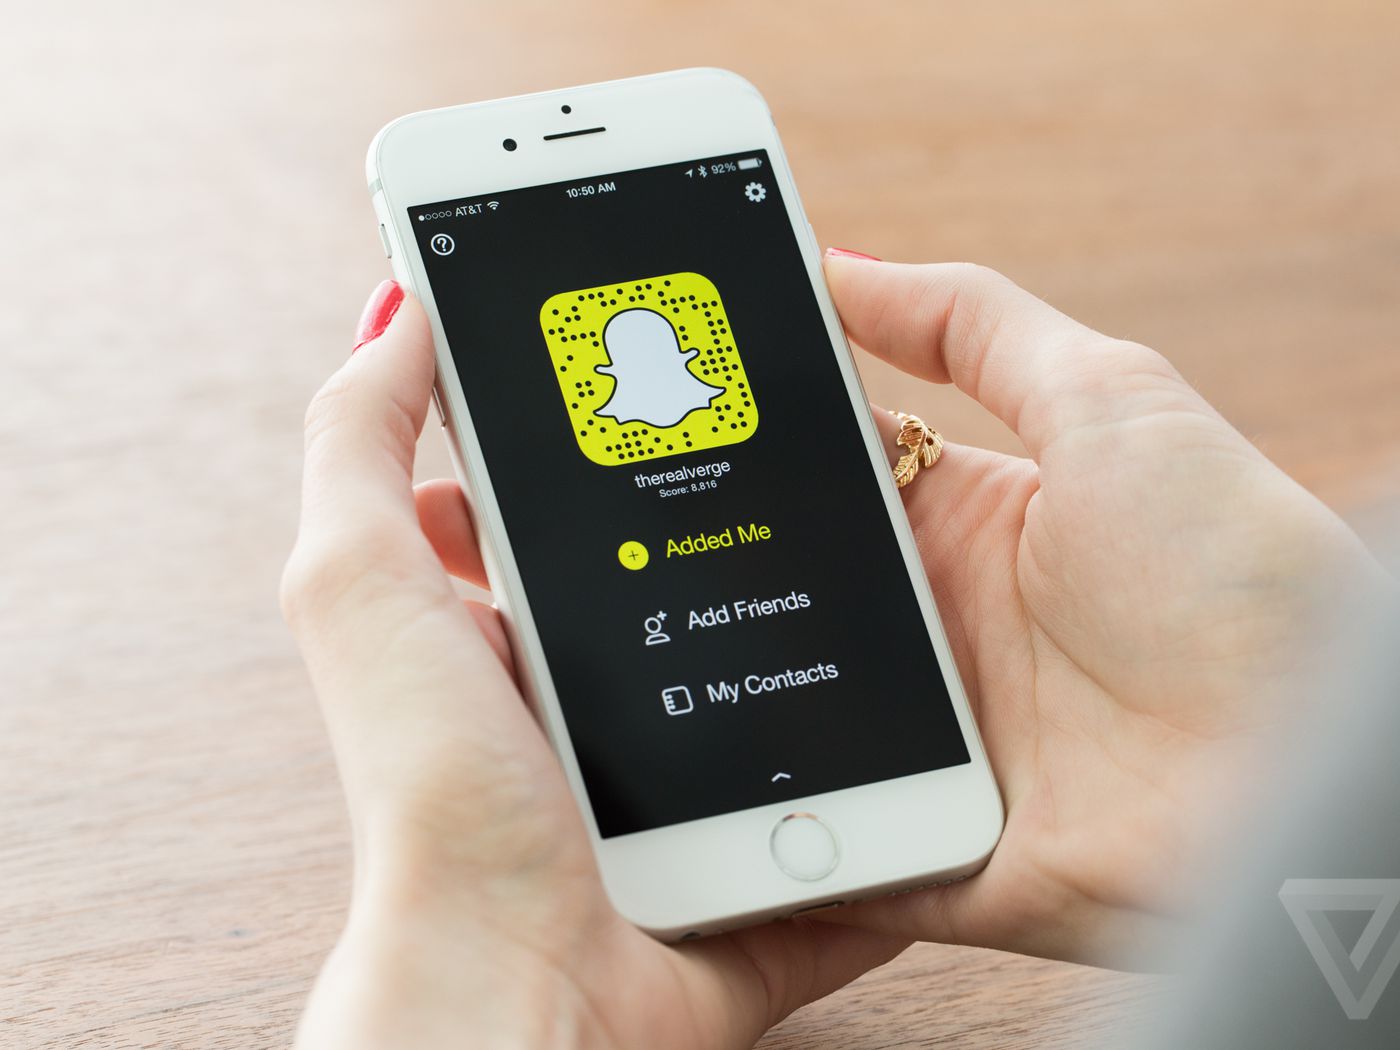 This Snapchat hack lets you record video for as long as you want - The Verge